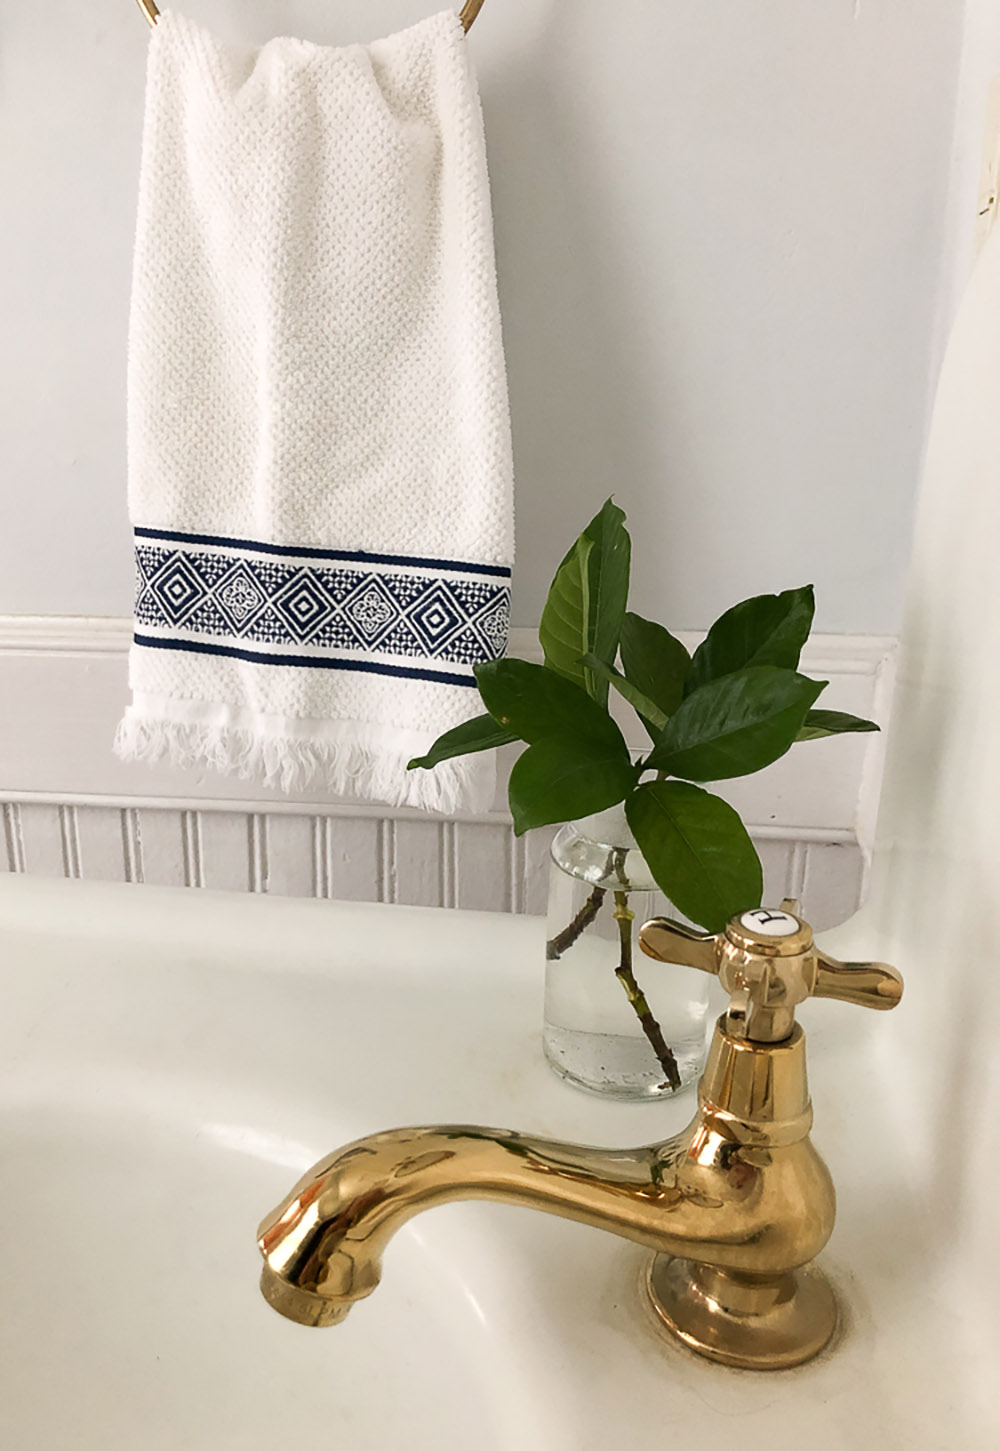 A brass hot fixture on a white cast-iron apron front sink.